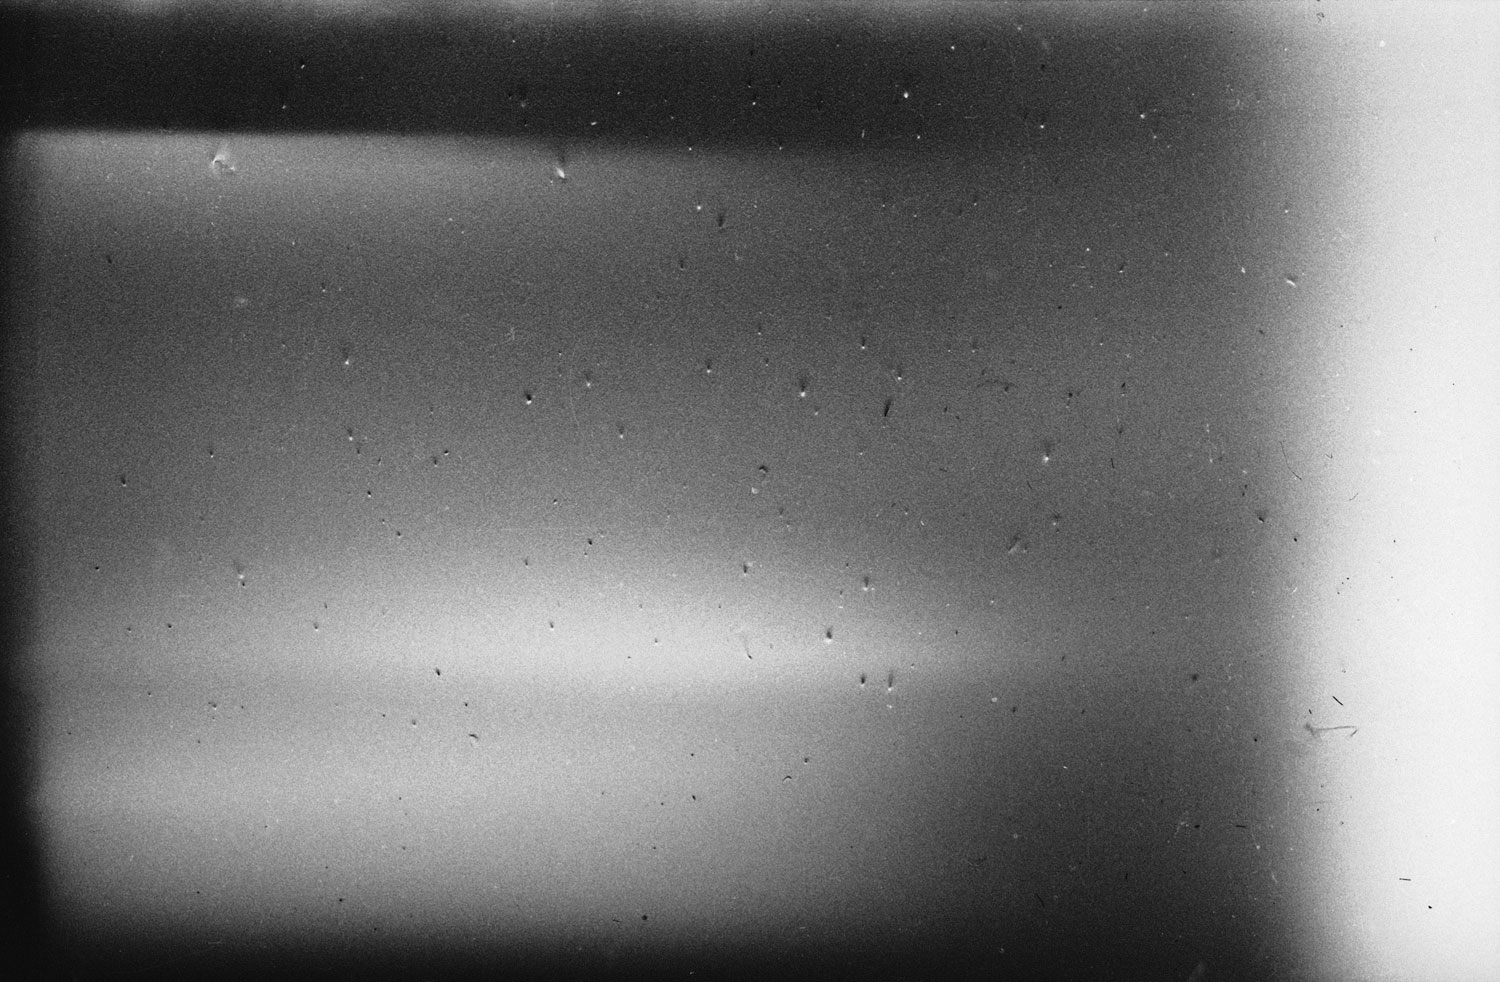 Frame from the roll of film found in Paul Schutzer's camera after he was killed on the first day of the Six-Day War, June 1967.